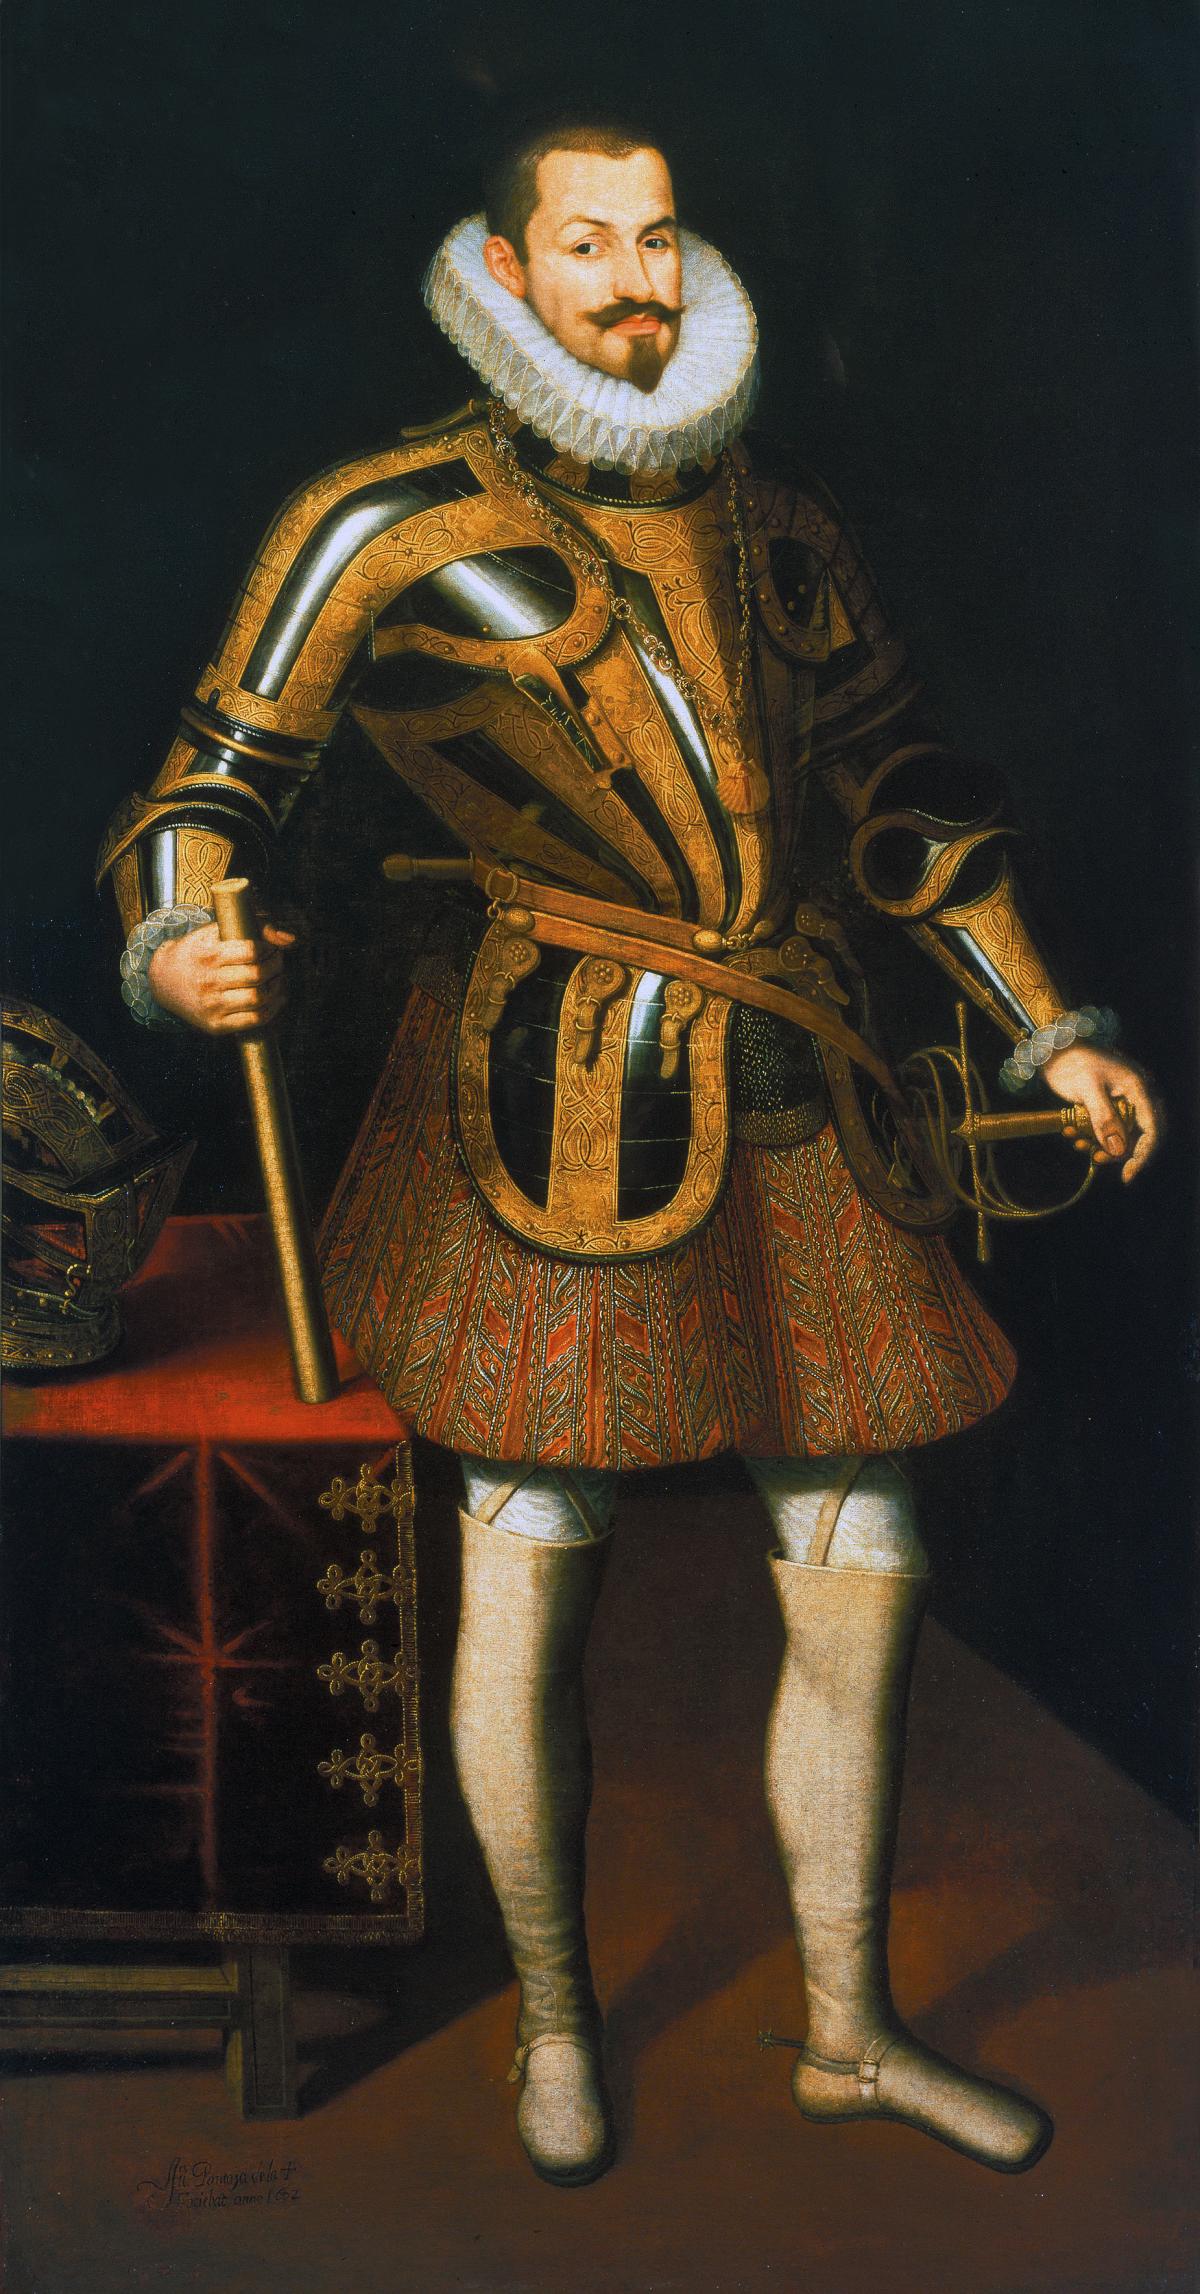 The Duke of Lerma, wearing a ruffled collar and armor with embroidered pantaloons, holding a map in one hand and sword in the other